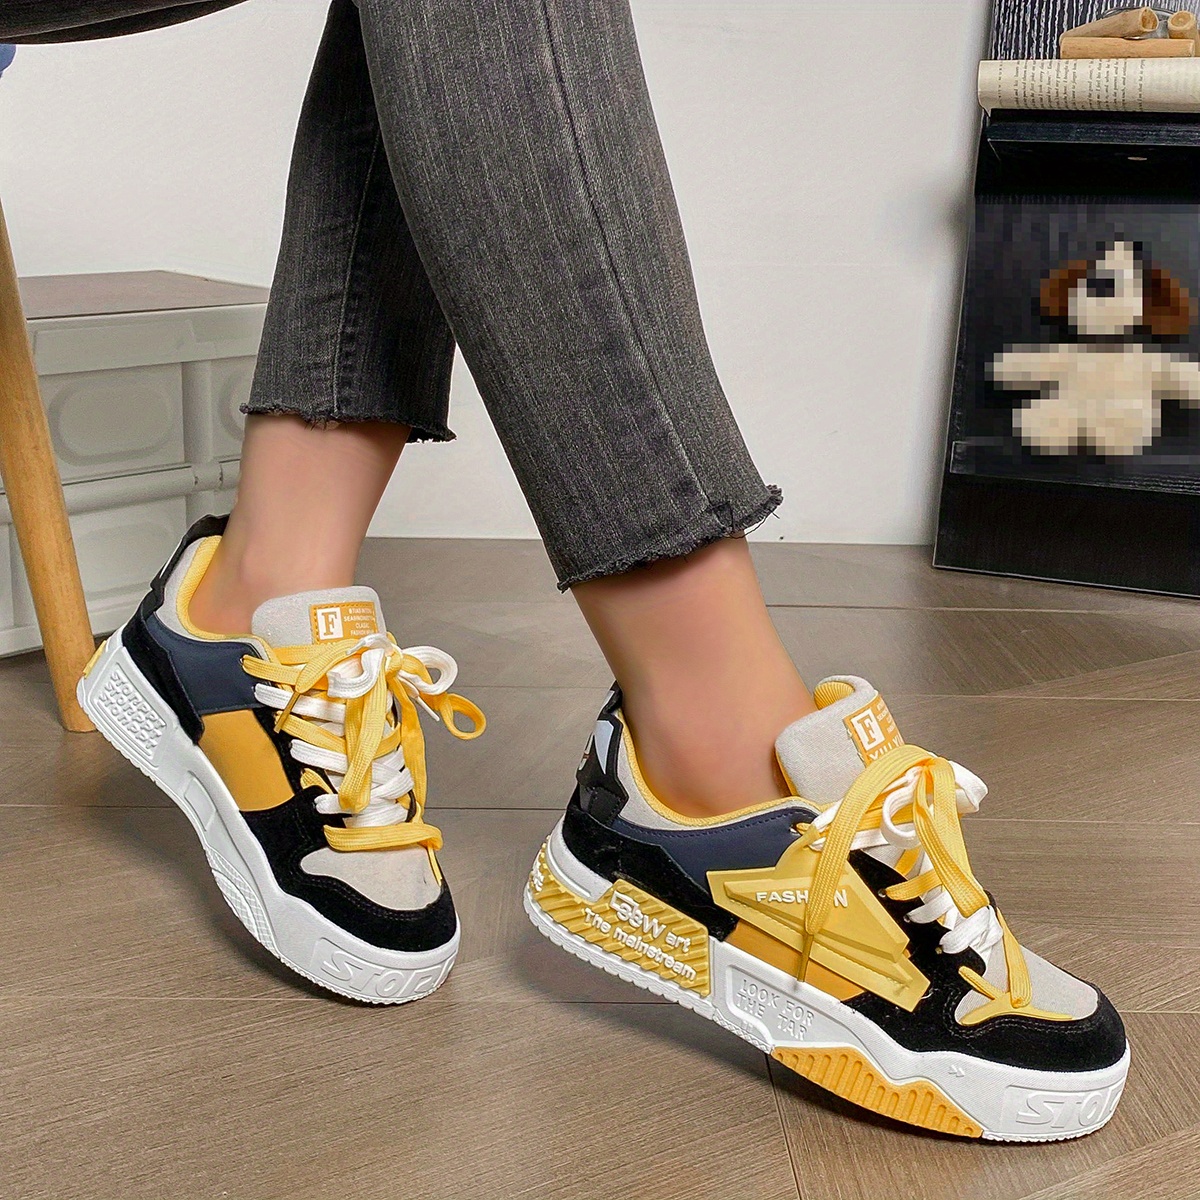 Deals of The Day Clearance Dvkptbk Sneakers for Women, Stylish Sneakers Women's Shoes Easy to Put on and Take Off Low-top Platform Sandals Yellow 6.5